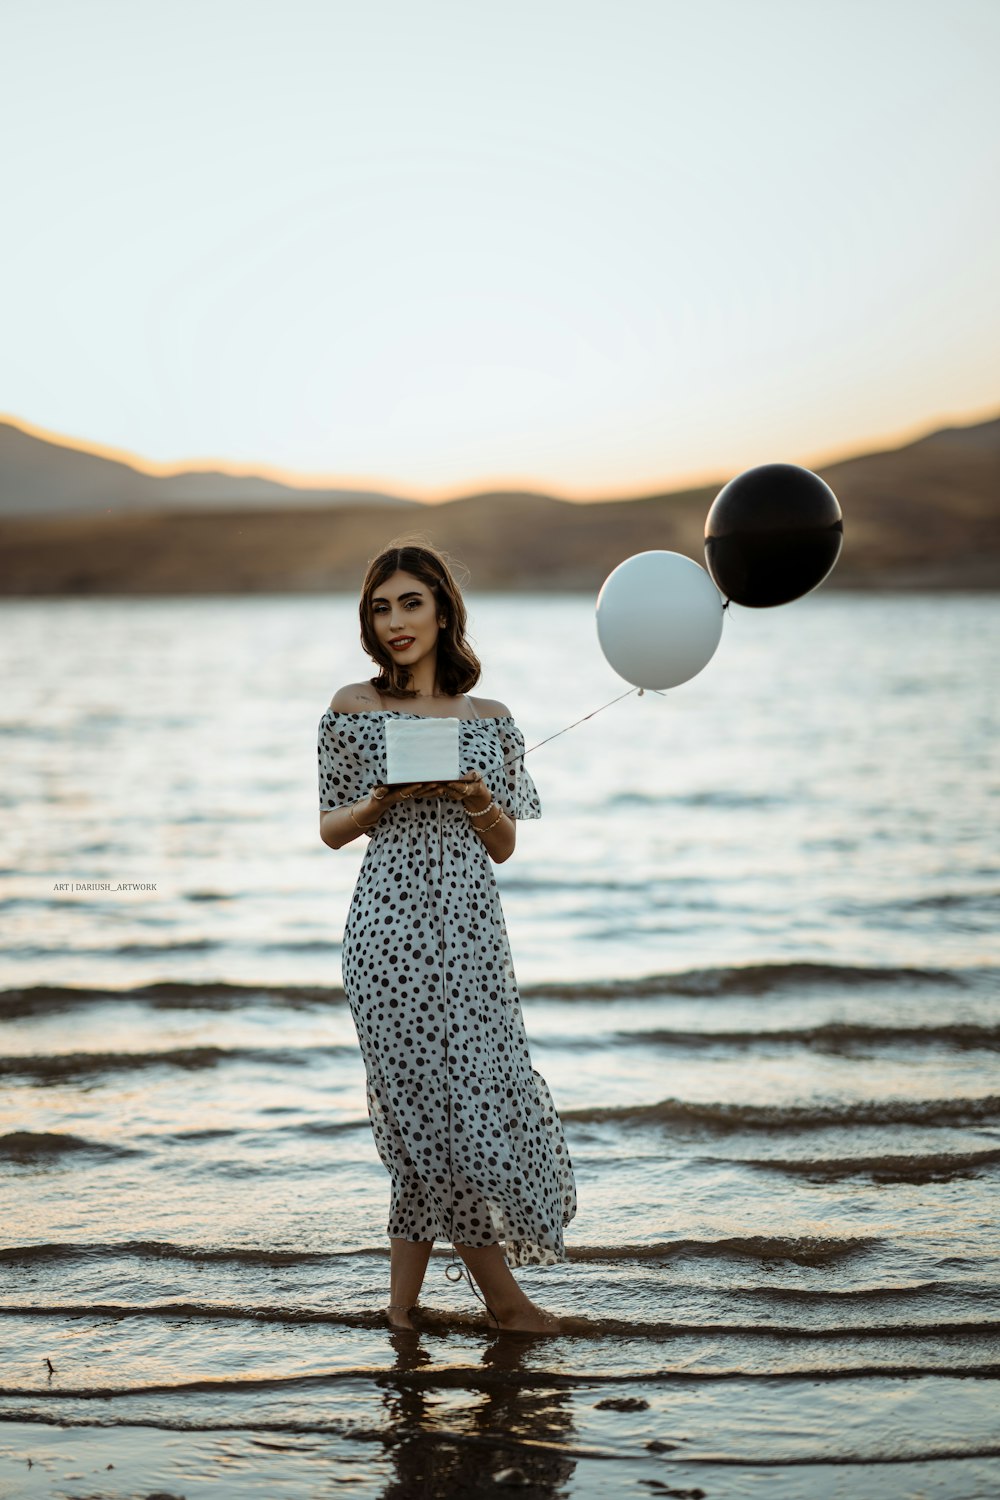 a person holding balloons on a beach